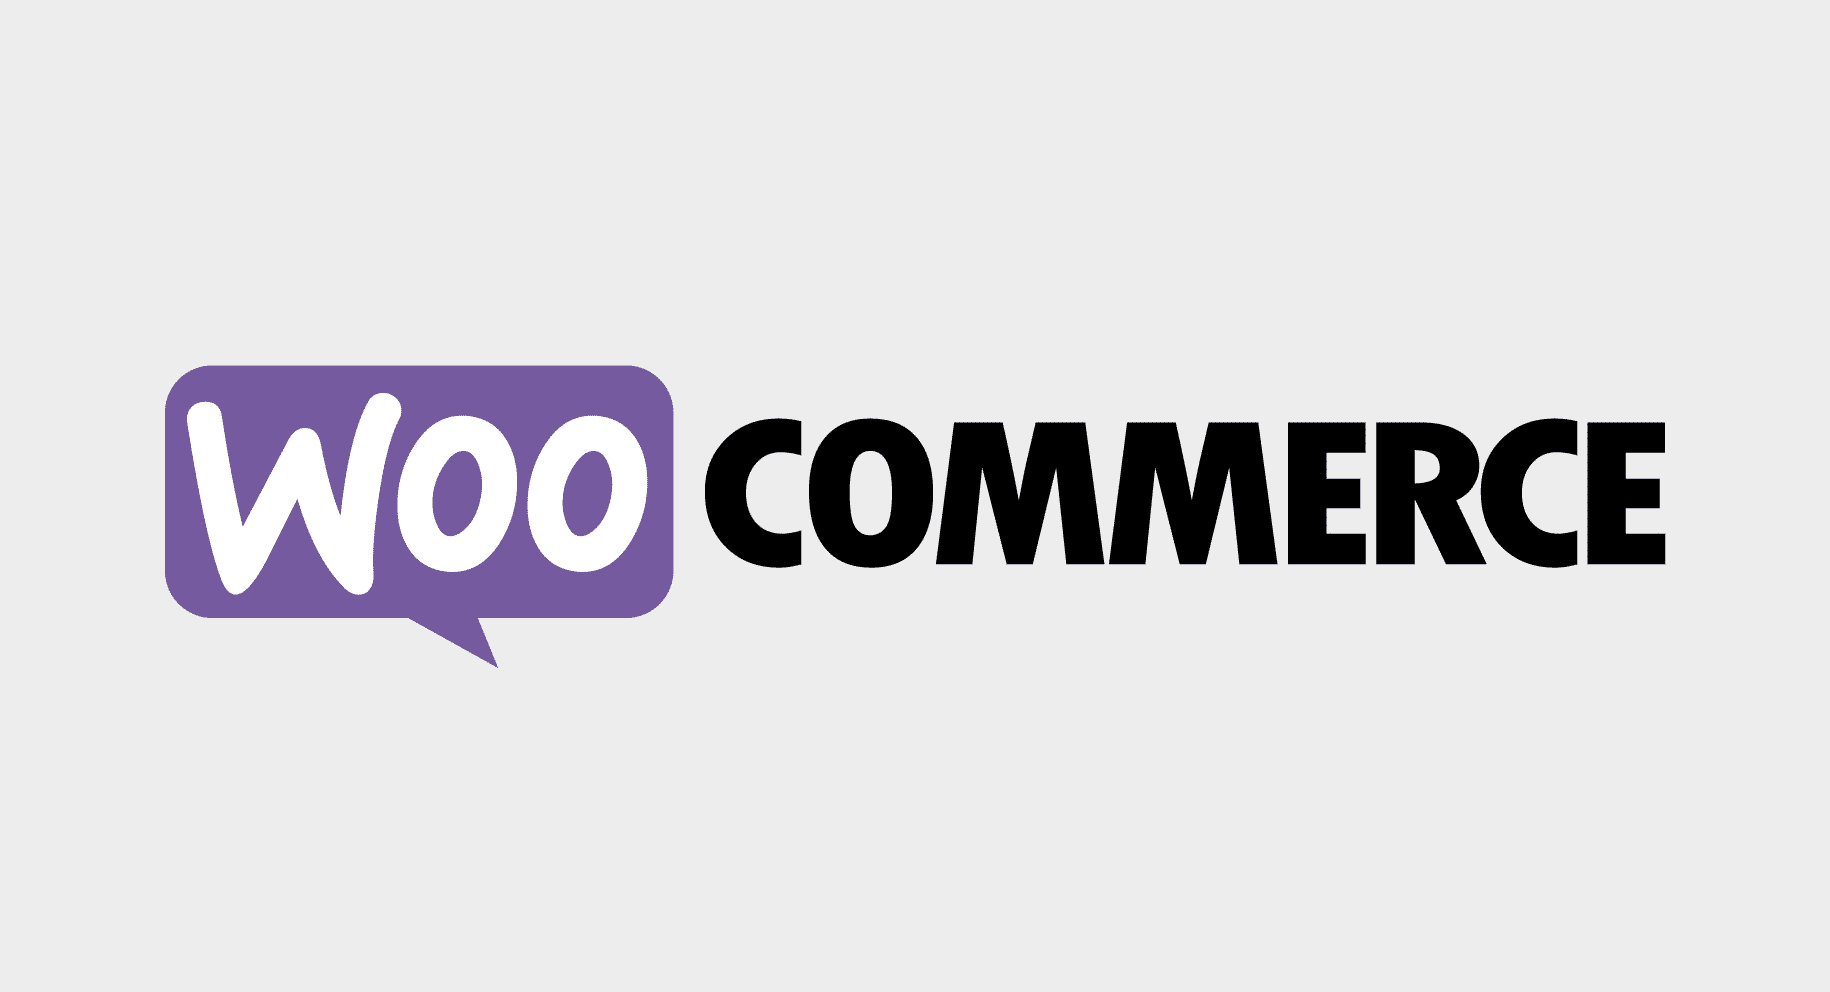 woocommerce-aims-to-produce-mvp-of-custom-tables-for-orders-by-q3-2022 WooCommerce 的目標是到 2022 年第三季度為訂單生產自定義表格的 MVP